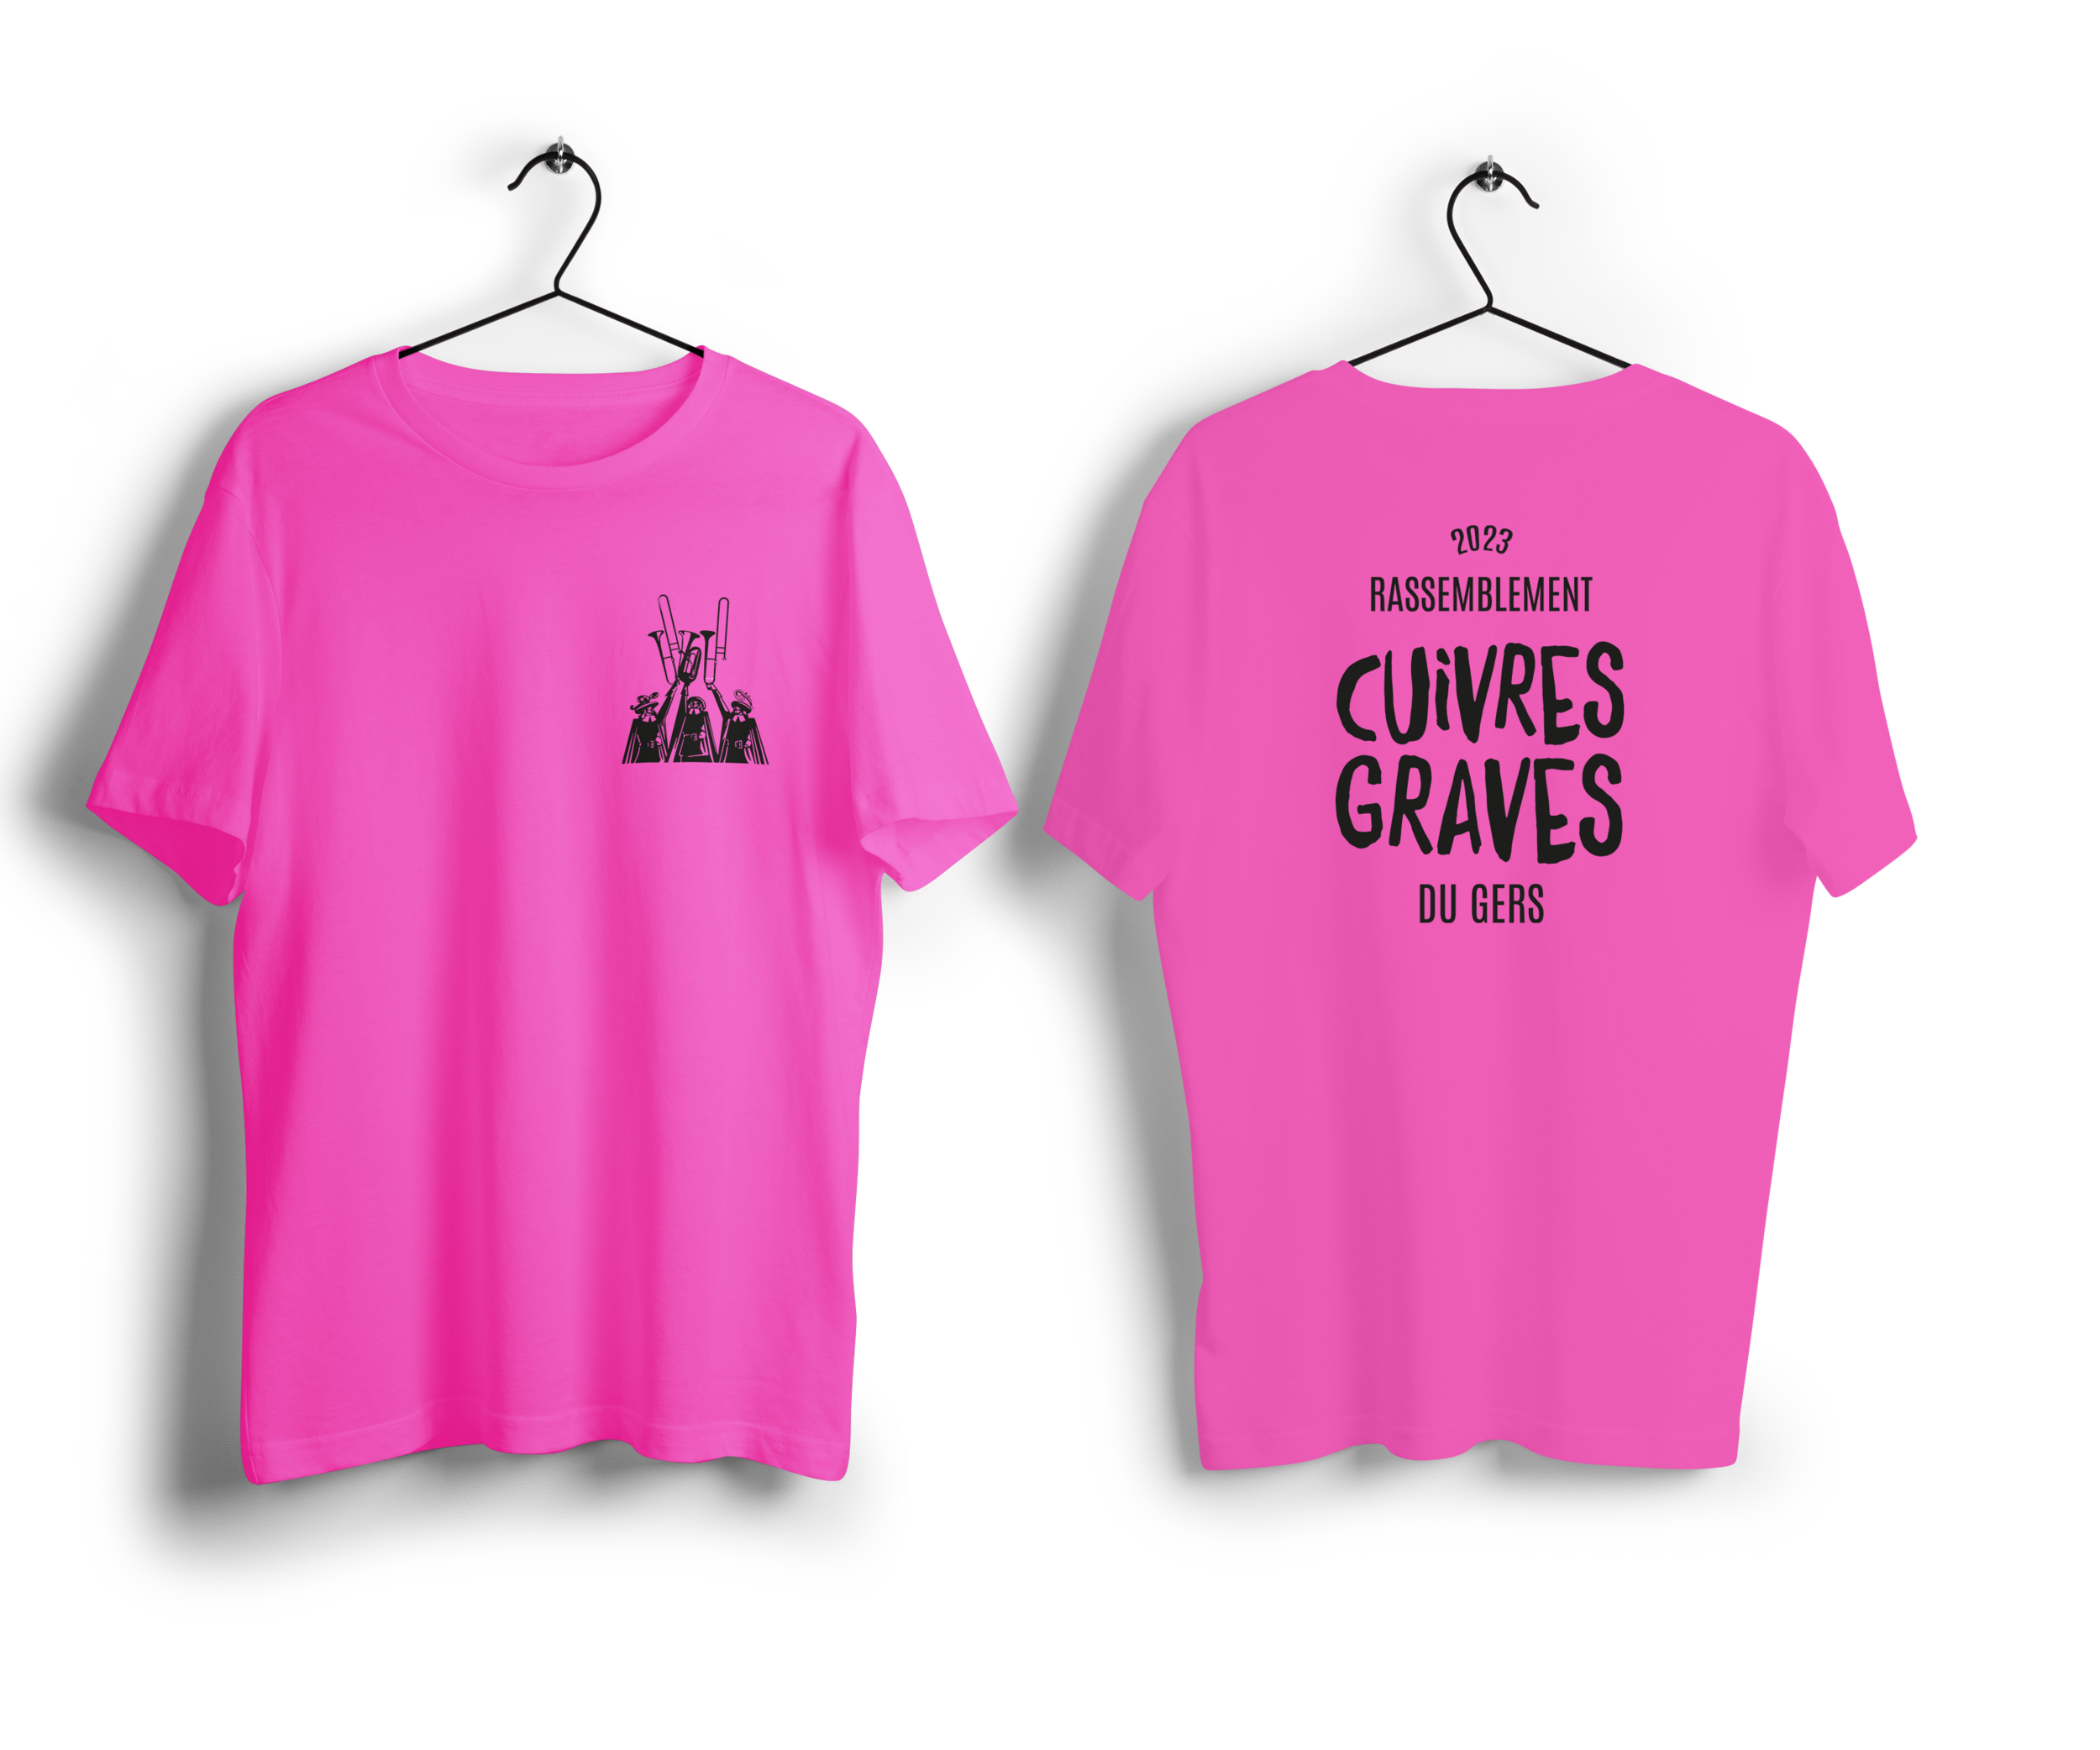 Gers-cuivres-grave